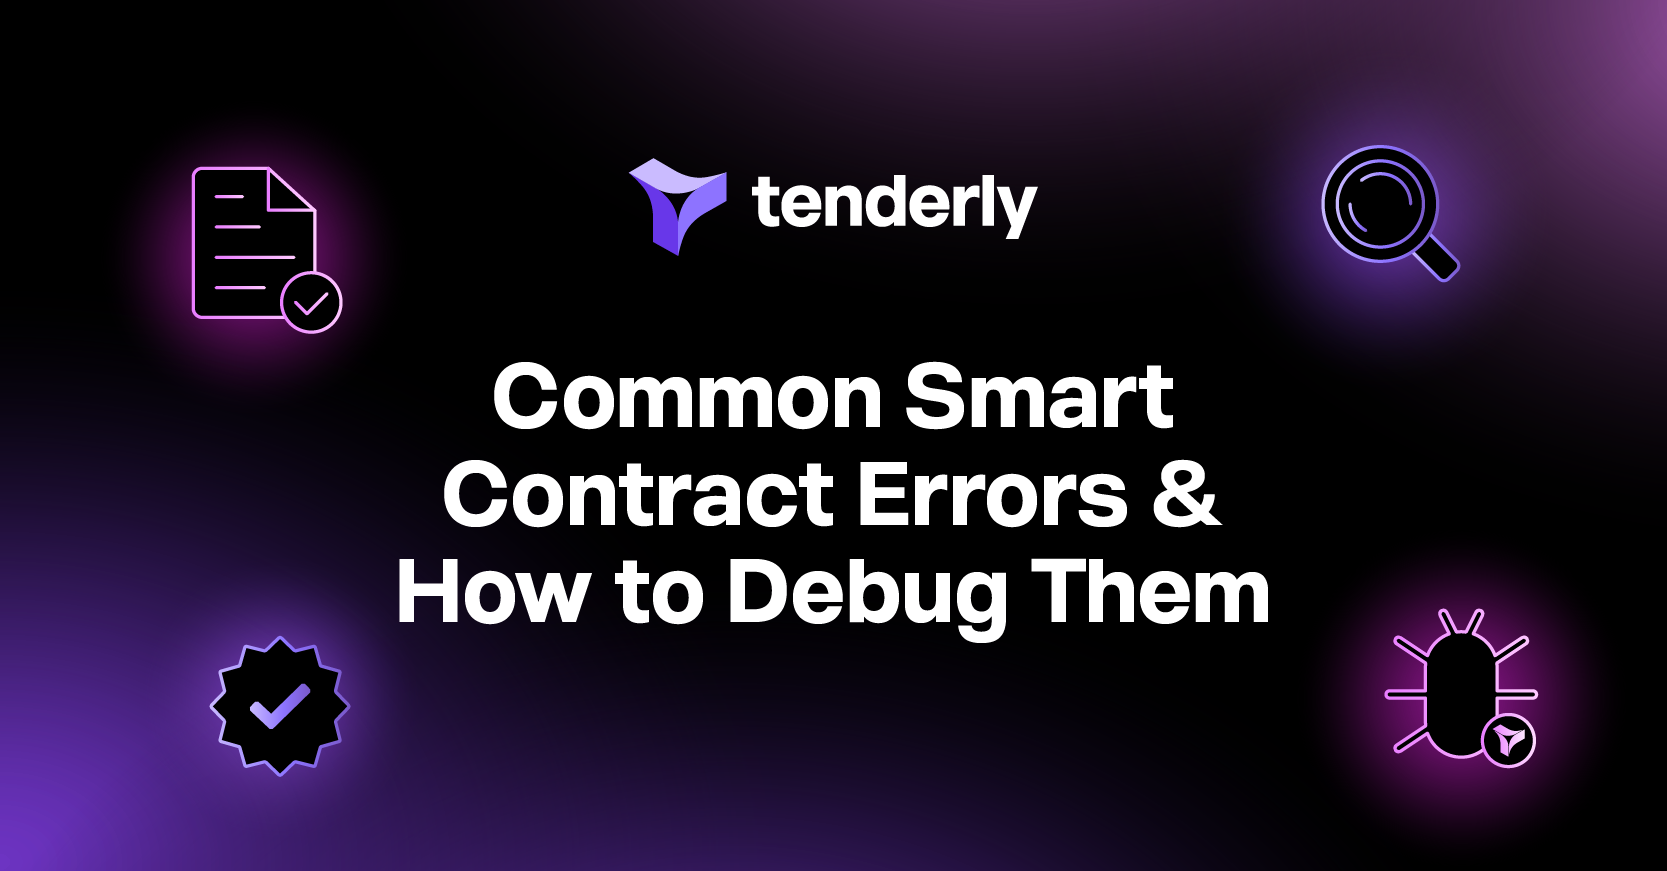 Common Smart Contract Errors & How to Debug Them